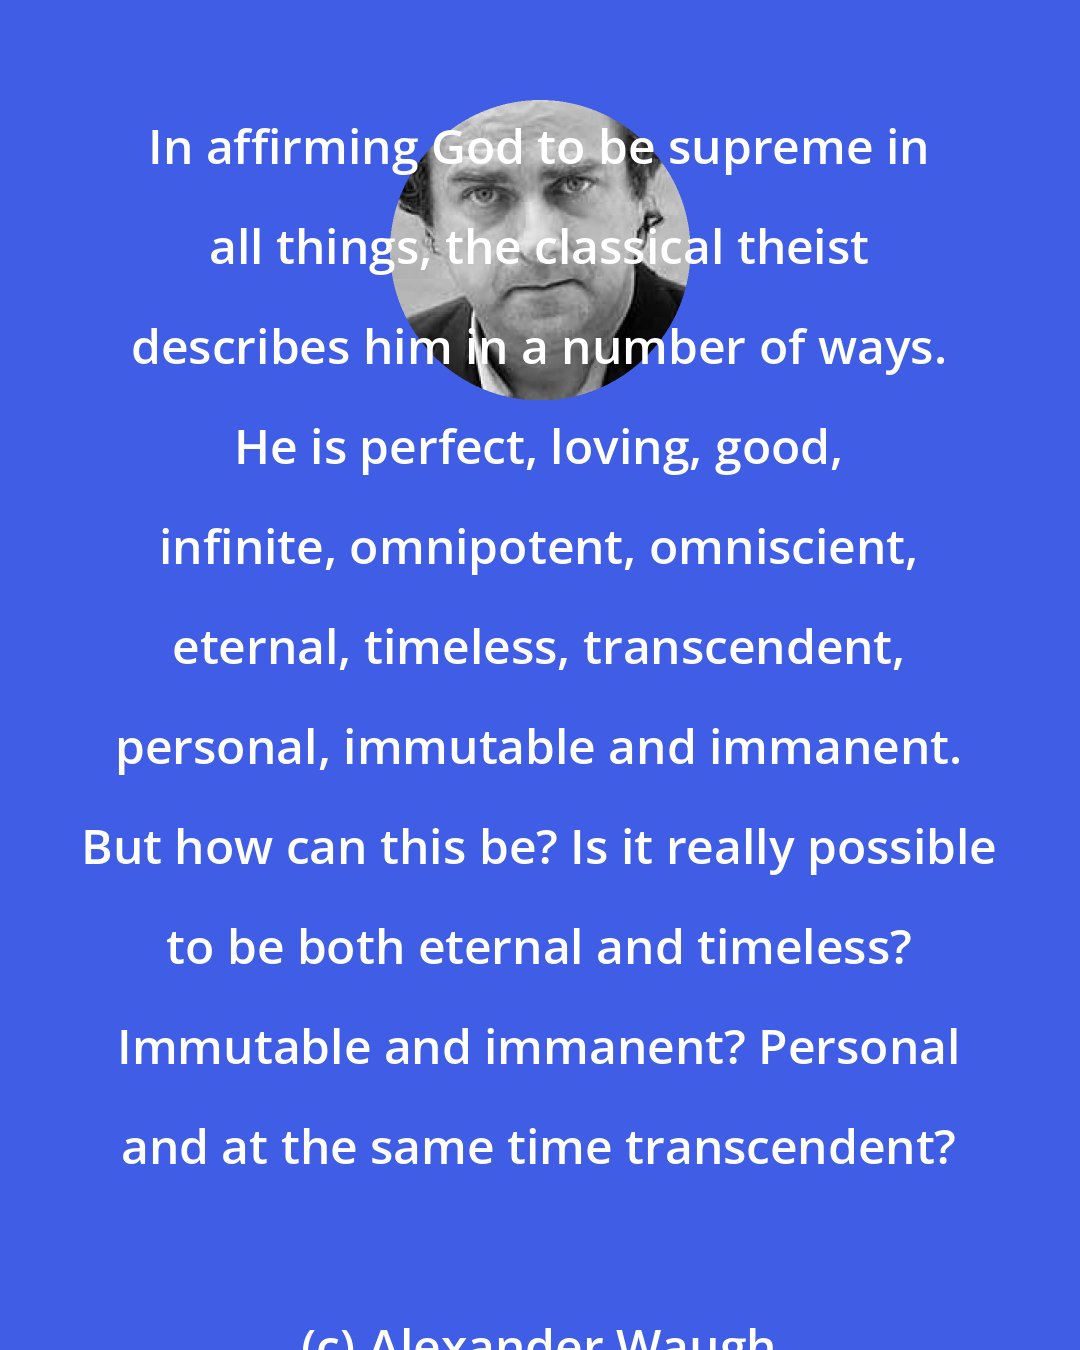 Alexander Waugh: In affirming God to be supreme in all things, the classical theist describes him in a number of ways. He is perfect, loving, good, infinite, omnipotent, omniscient, eternal, timeless, transcendent, personal, immutable and immanent. But how can this be? Is it really possible to be both eternal and timeless? Immutable and immanent? Personal and at the same time transcendent?